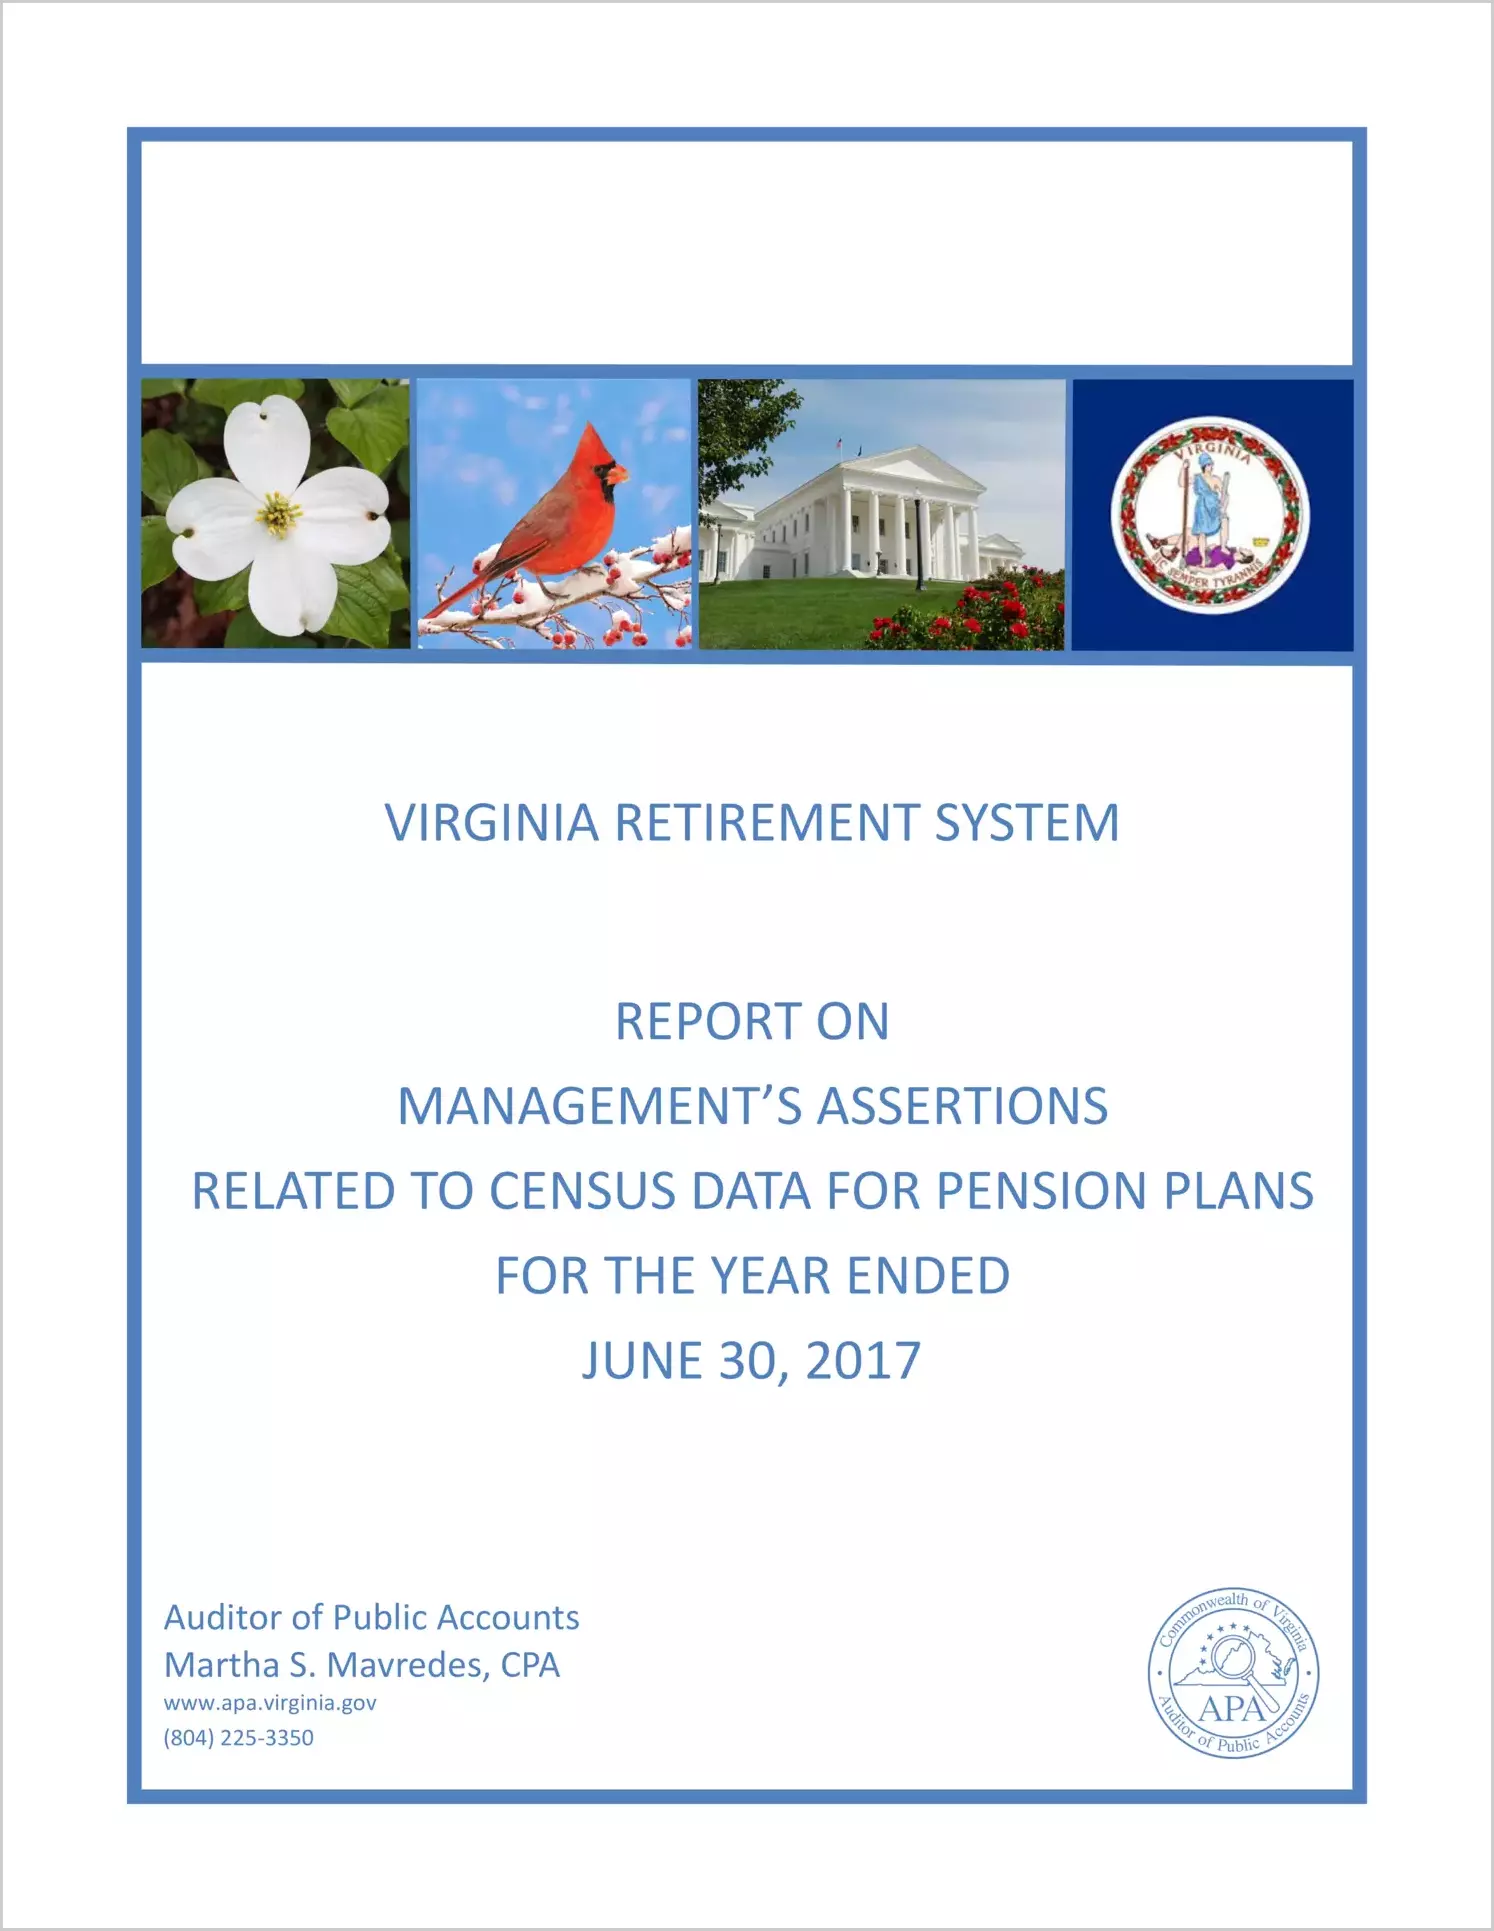 Virginia Retirement System Management's Assertions Related to Census Data for Pension Plans for the year ended June 30, 2017